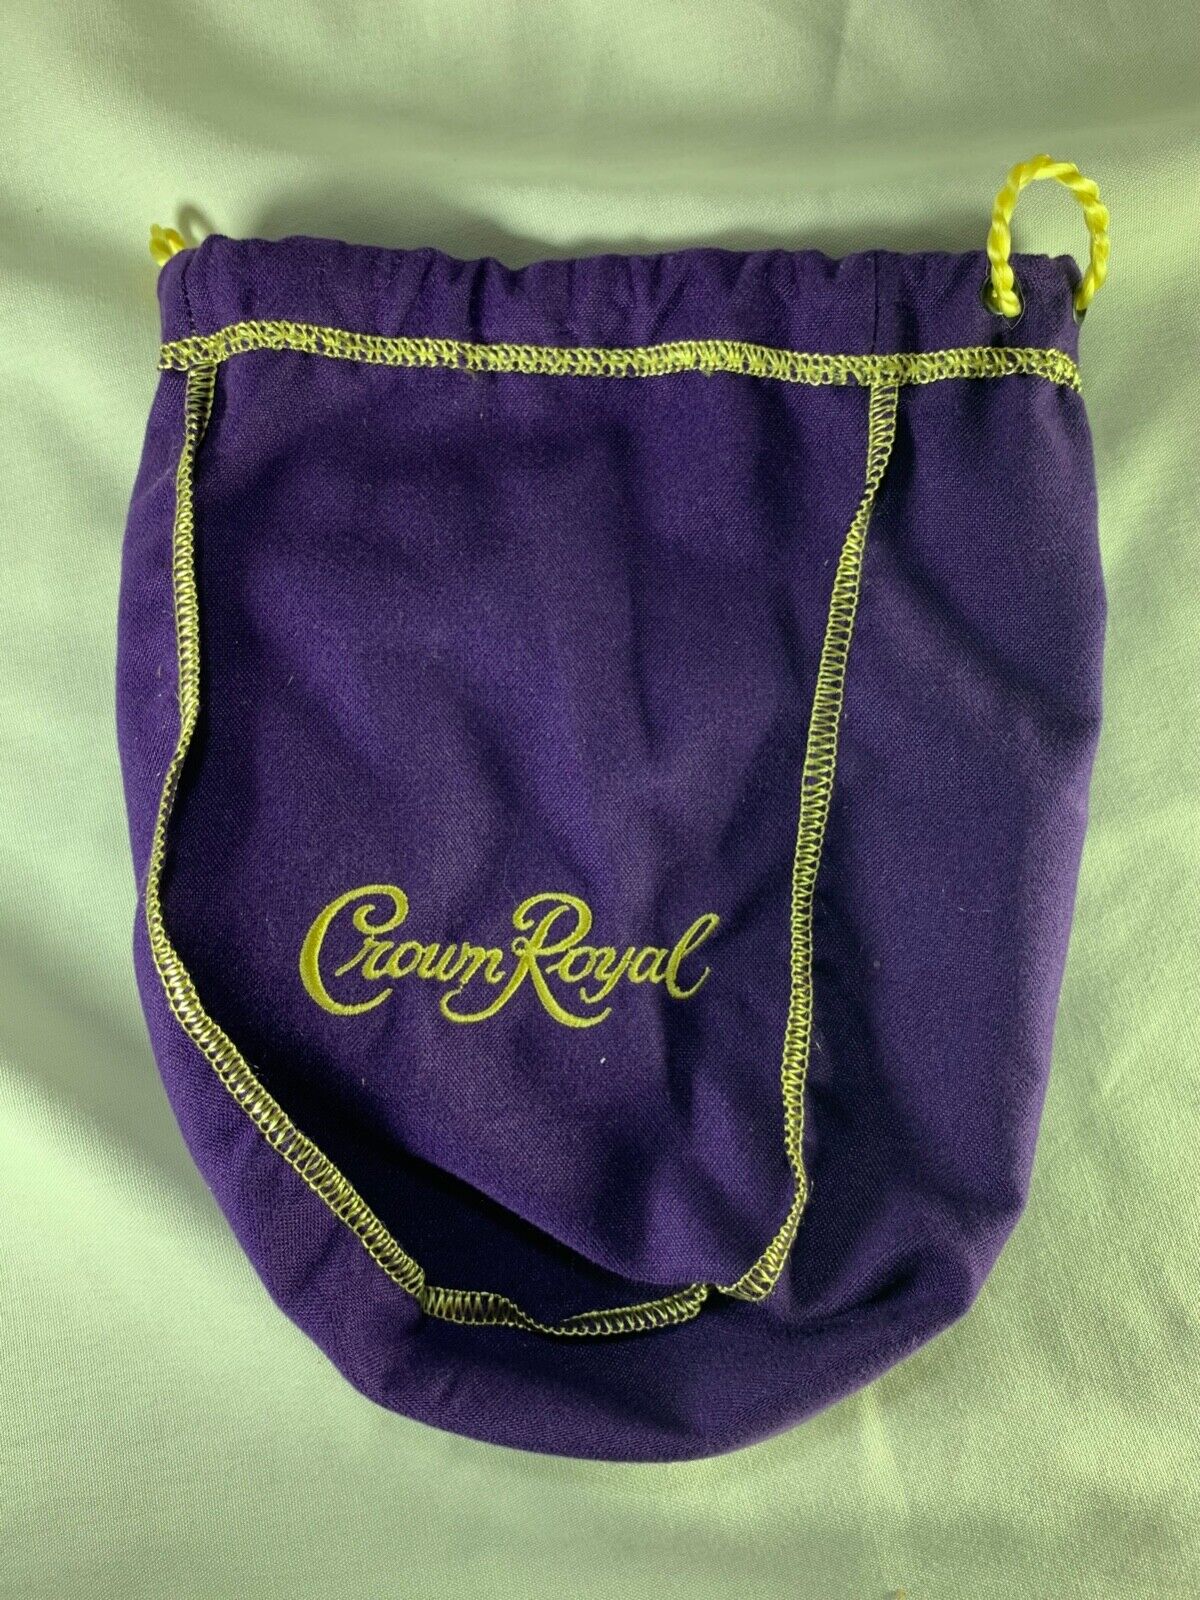 Crown Royal Purple Felt Bags from 750ml bottles, 9 inches length